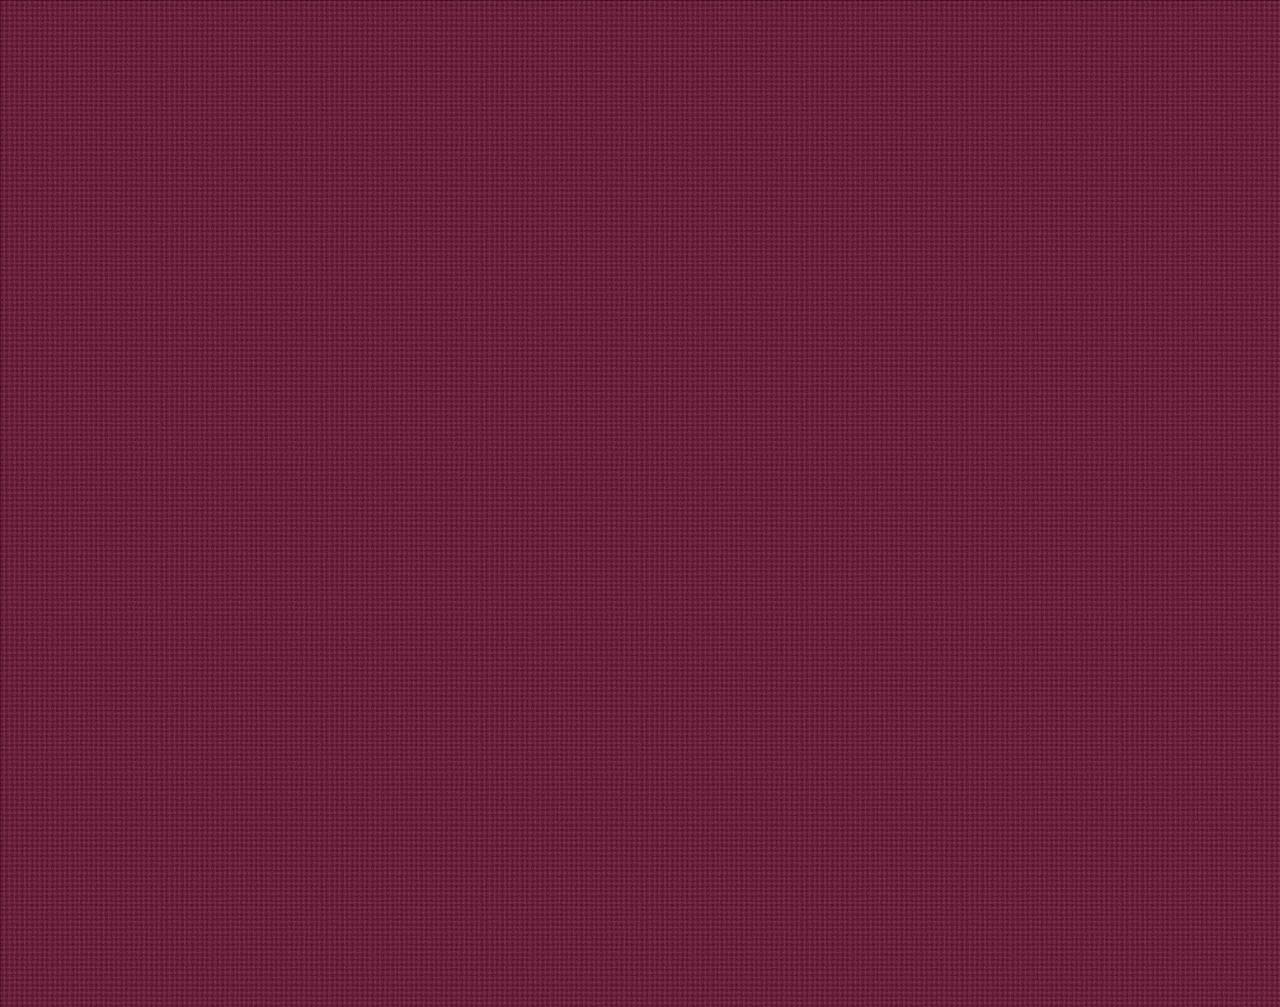 Free coloring pages of maroon burgundy